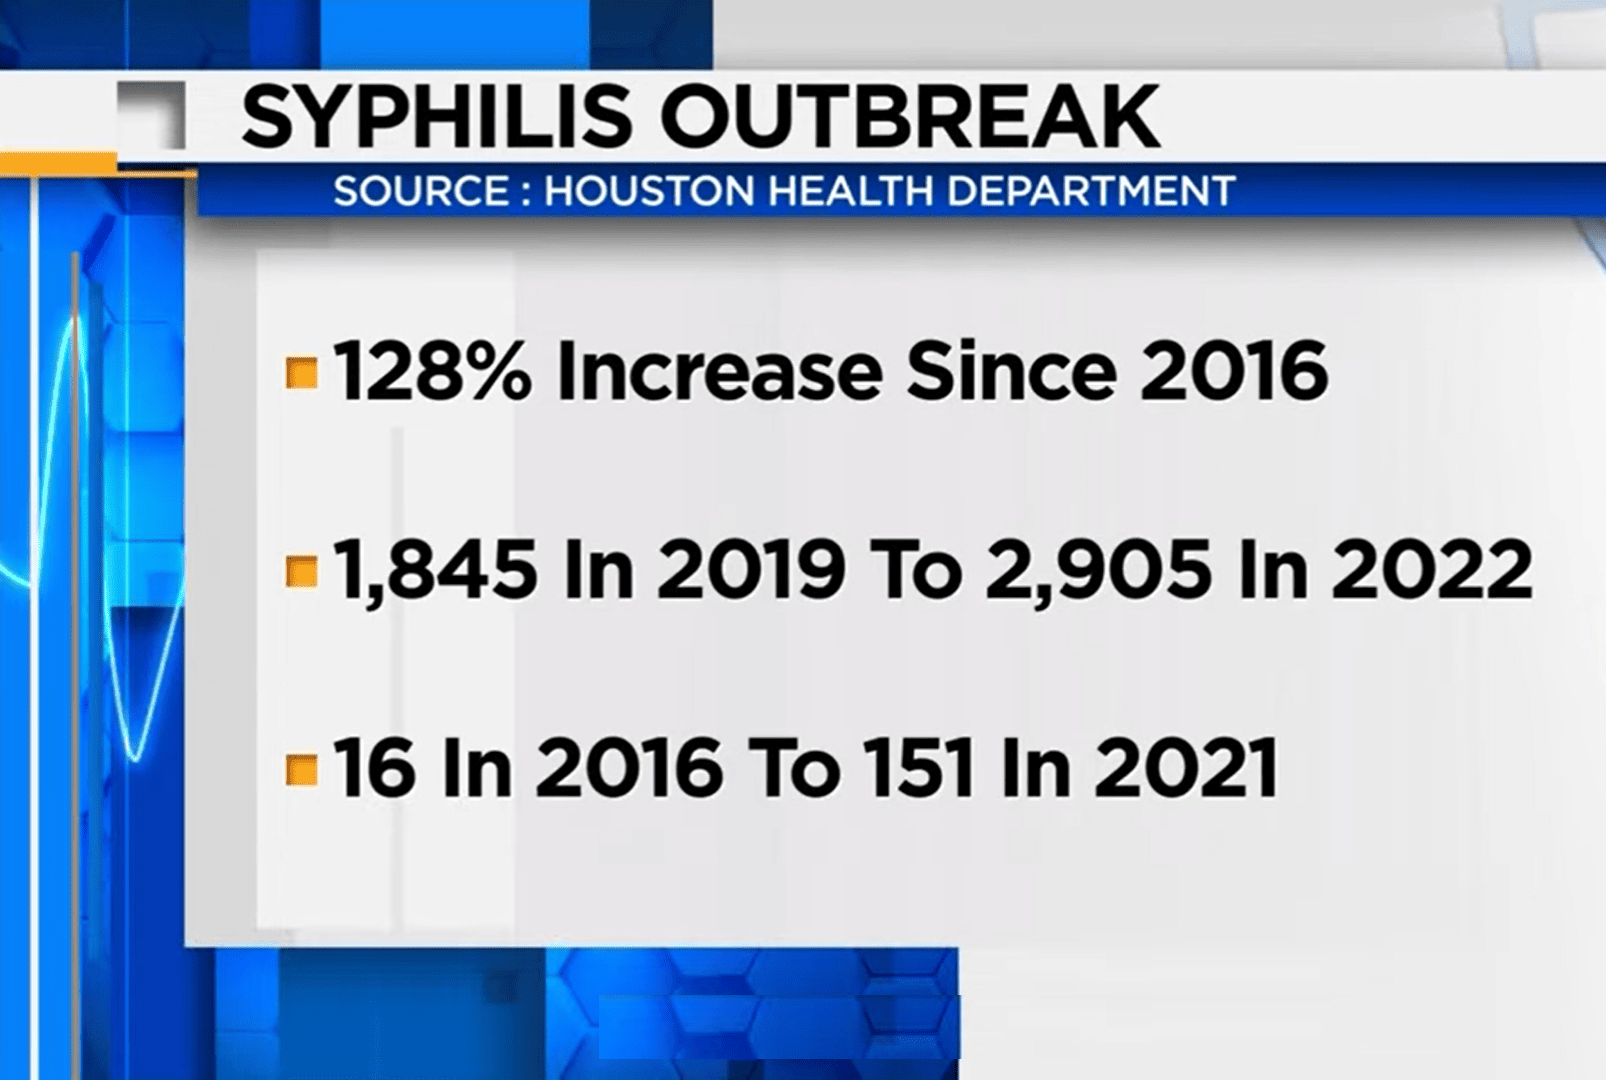 Syphilis cases pregnant women in Houston on the rise